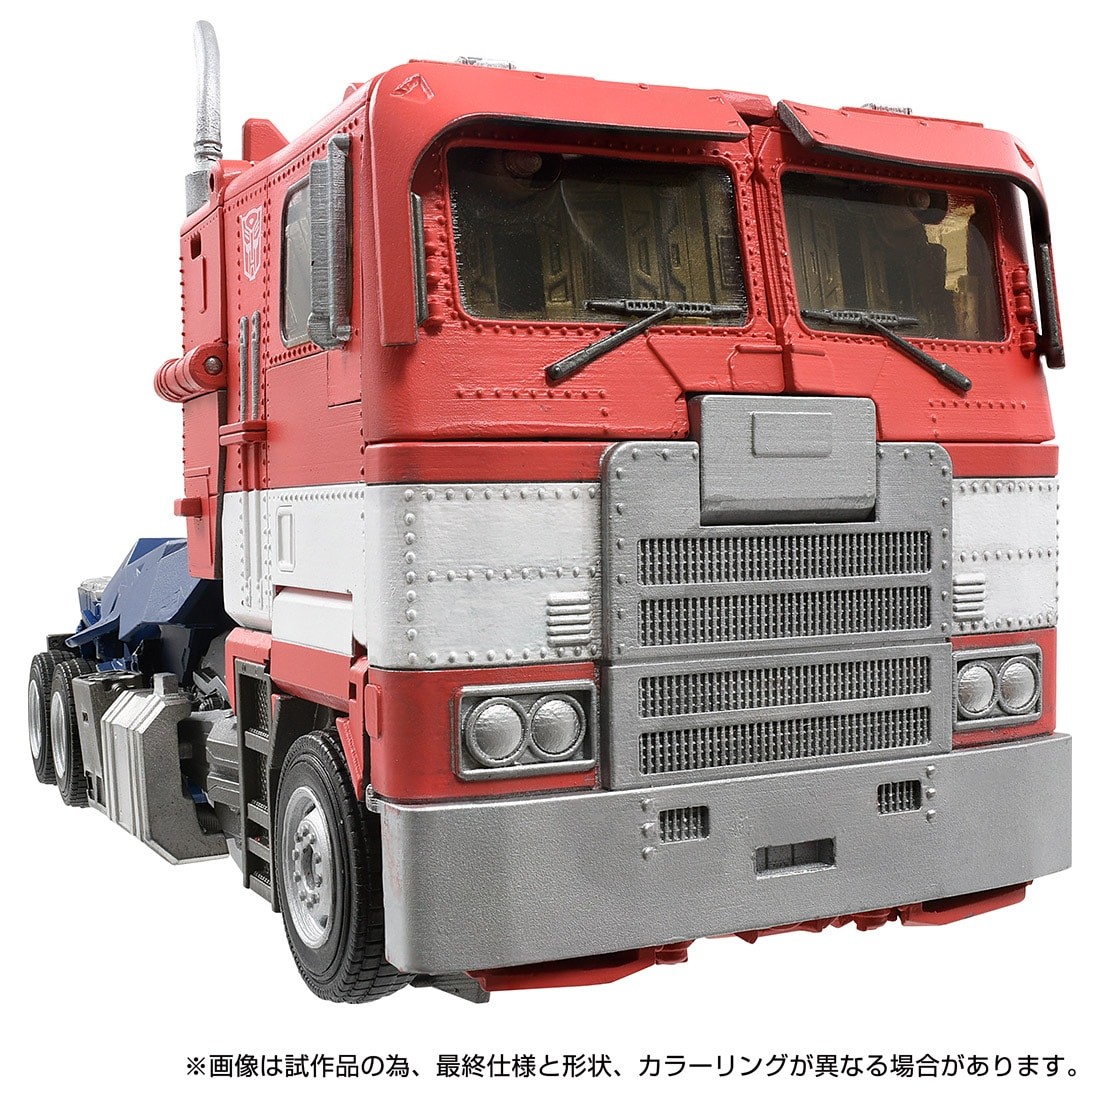 Transformers News: New Stock Images of MPM-12 Bumblebee Movie Optimus Prime